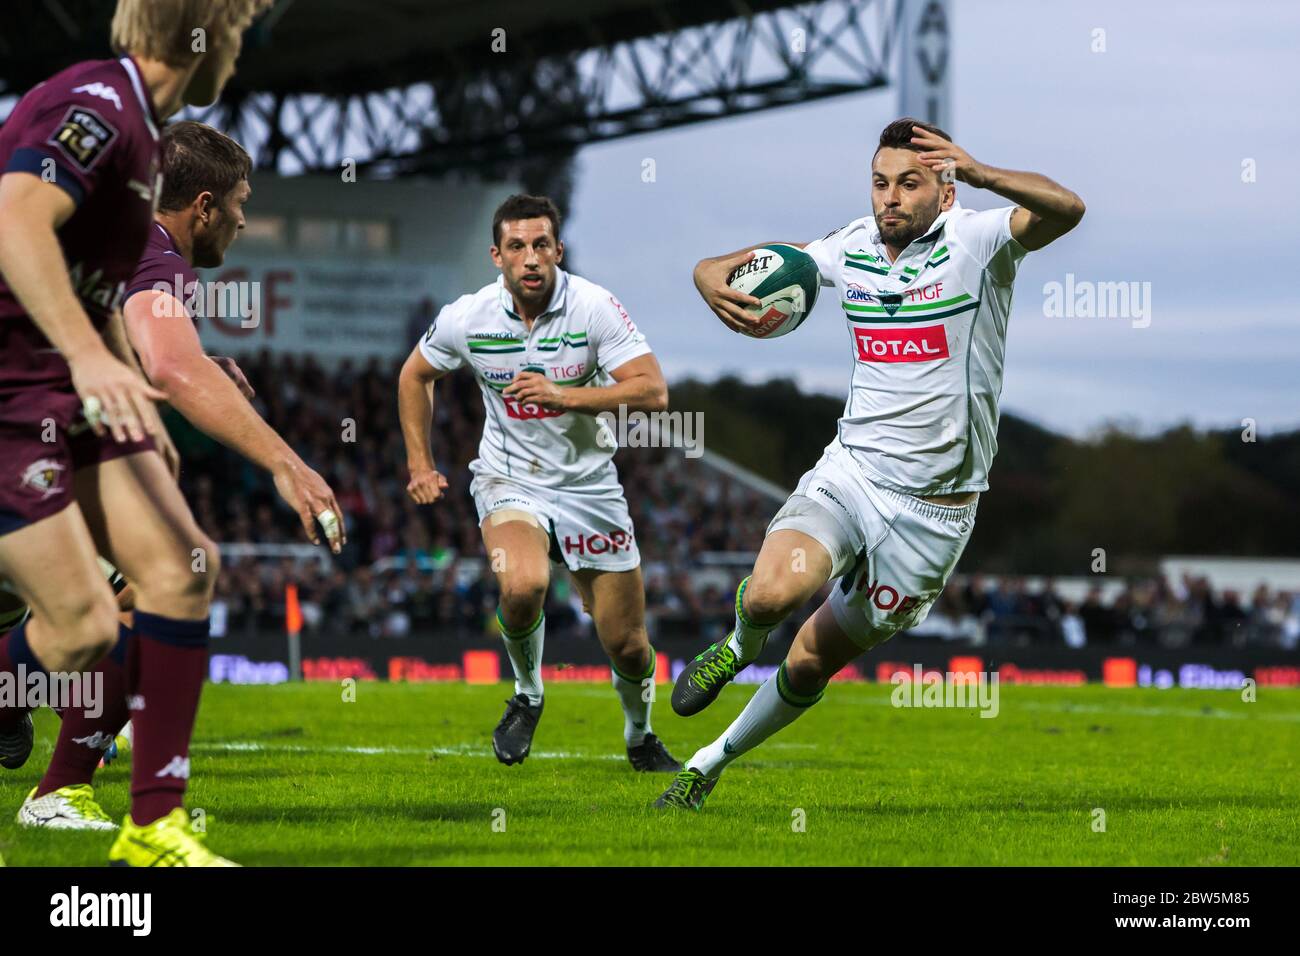 Pau, FRANCE - OCTOBER 01 2016 :  Charly Malie during the  Top 14 match between Section Paloise and UBB at Stade du Hameau. Stock Photo